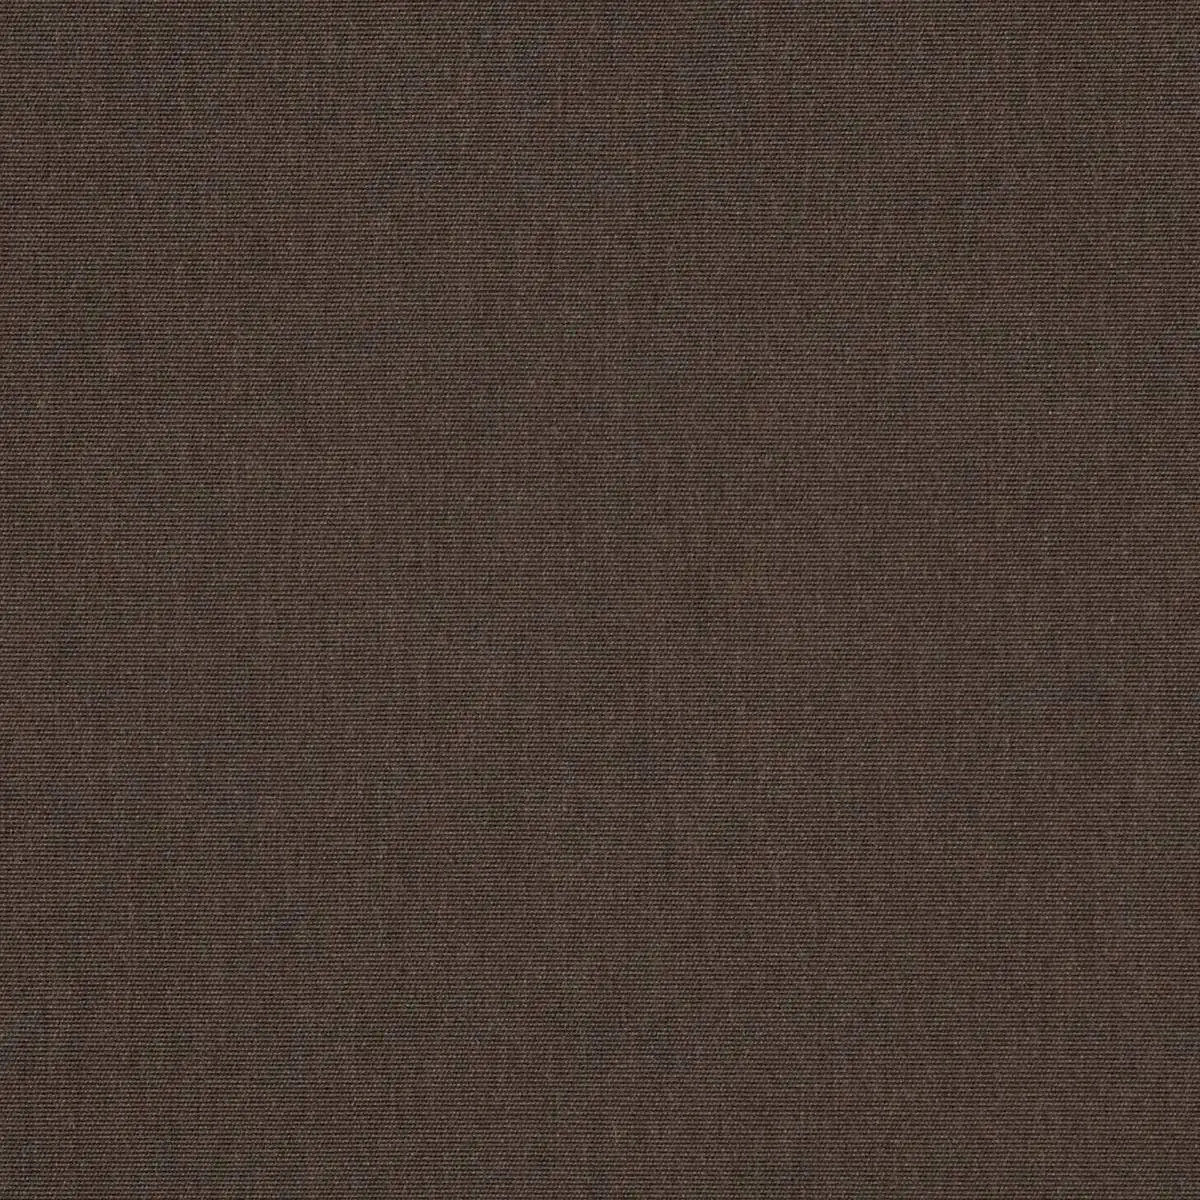 Fabric Colors B Canvas Java Swatch